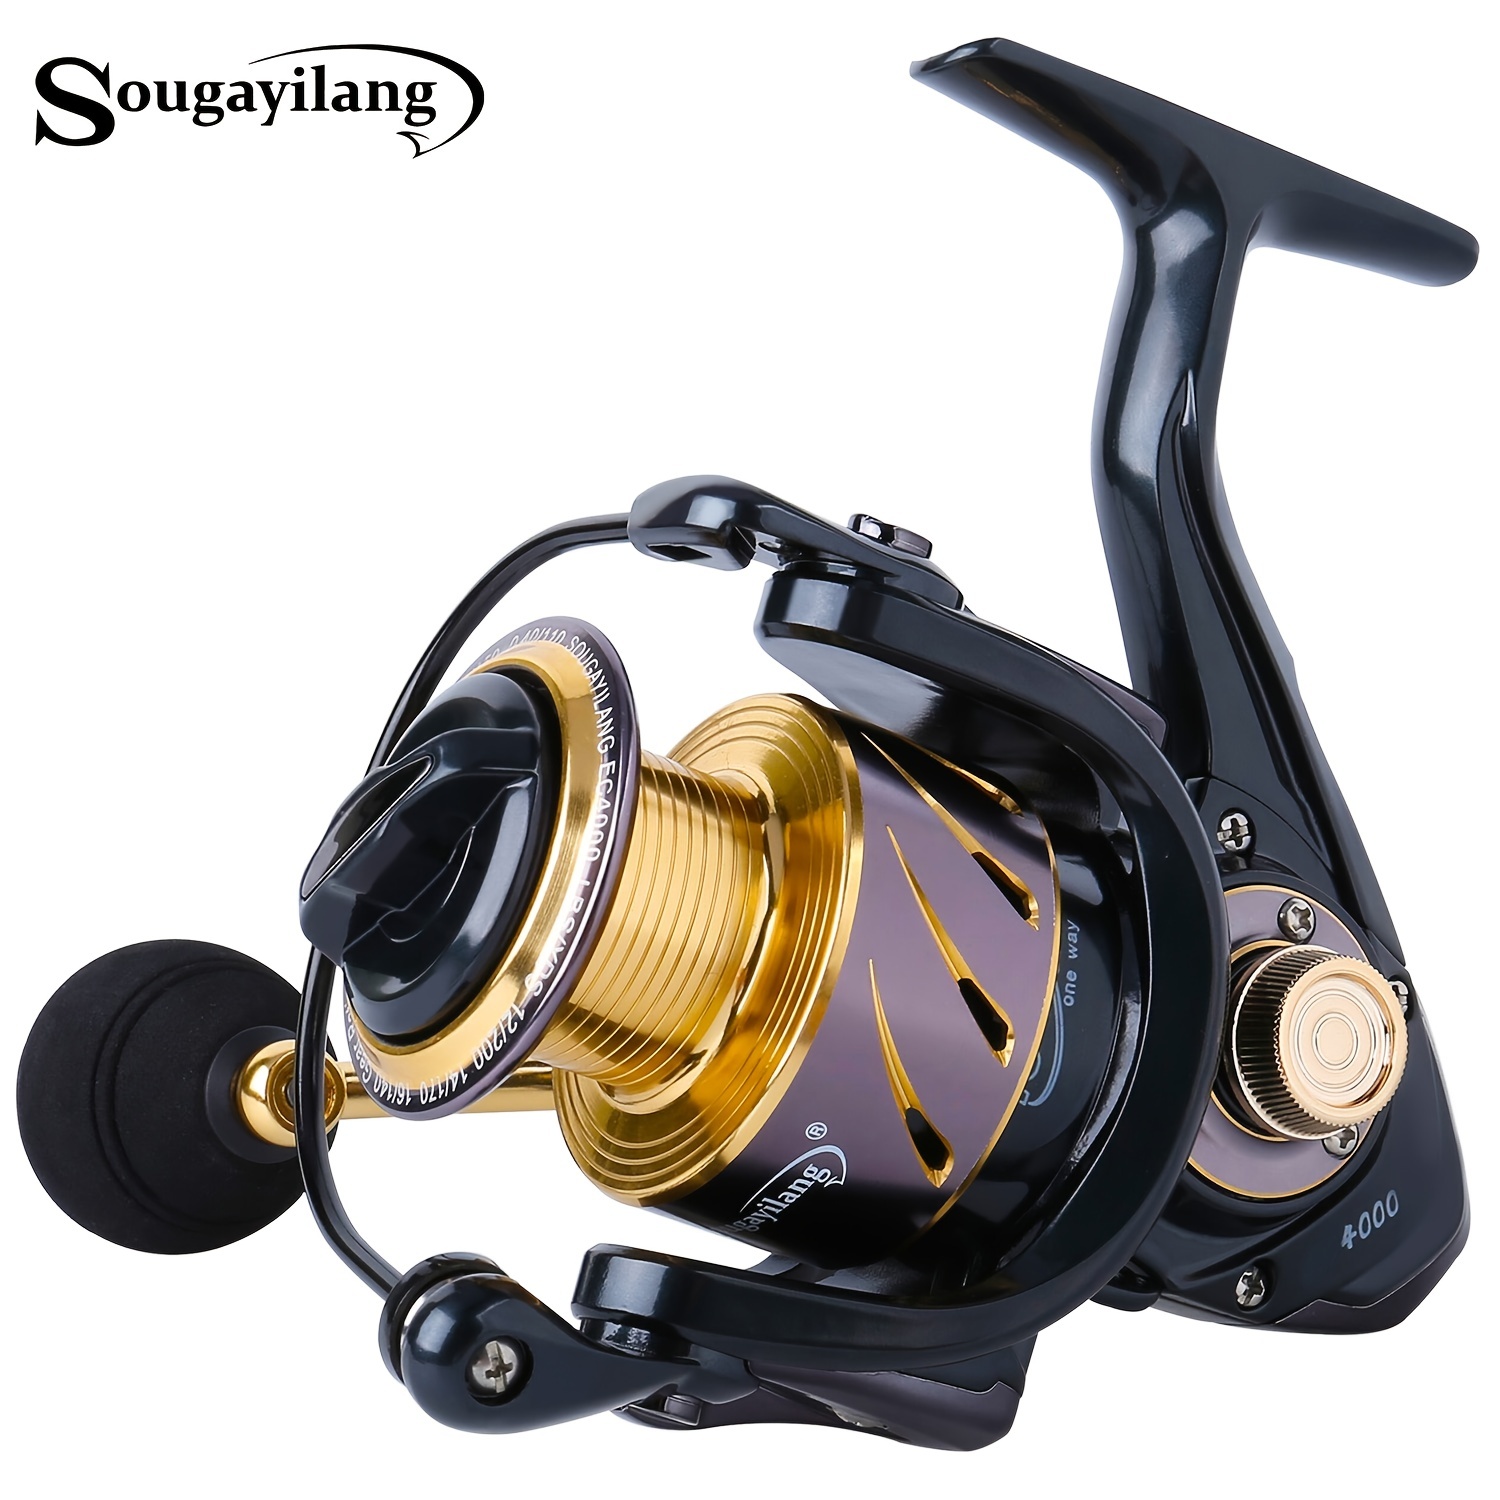 13+1 BB Spinning Fishing Reel - High Speed Gear Ratio for Bass, Trout &  Saltwater Fishing!